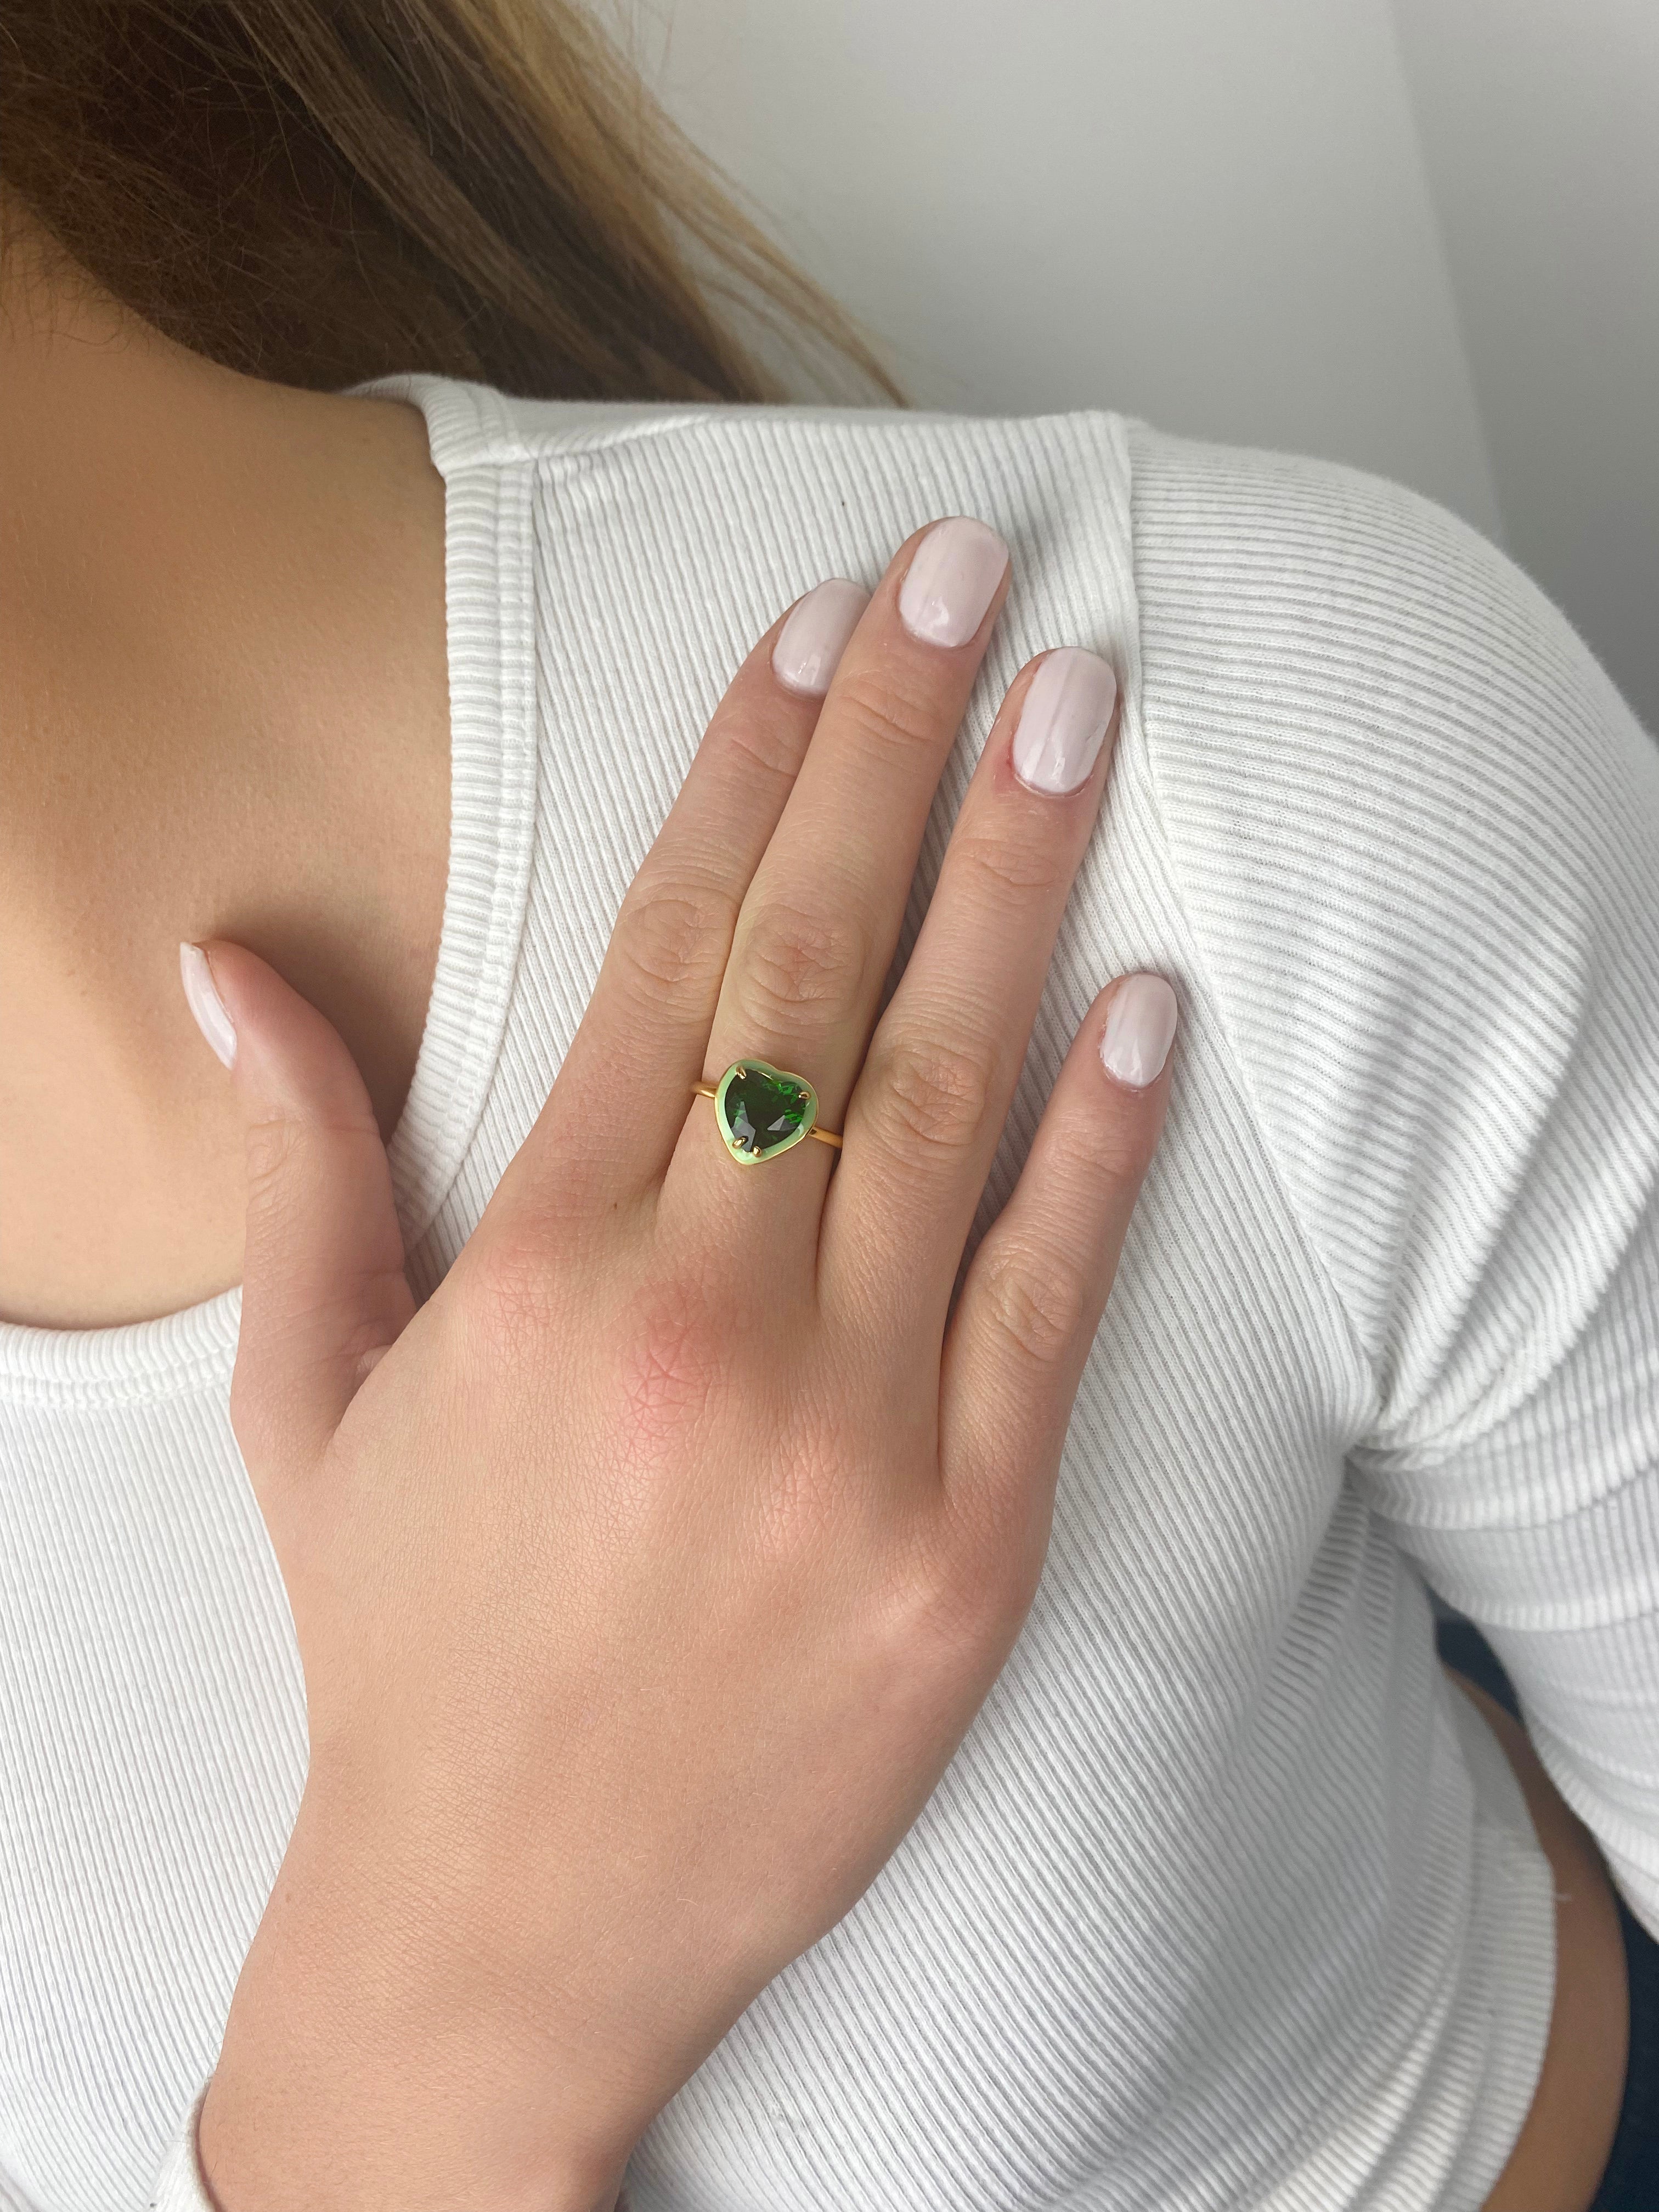 Sweetheart Adjustable Ring in Green